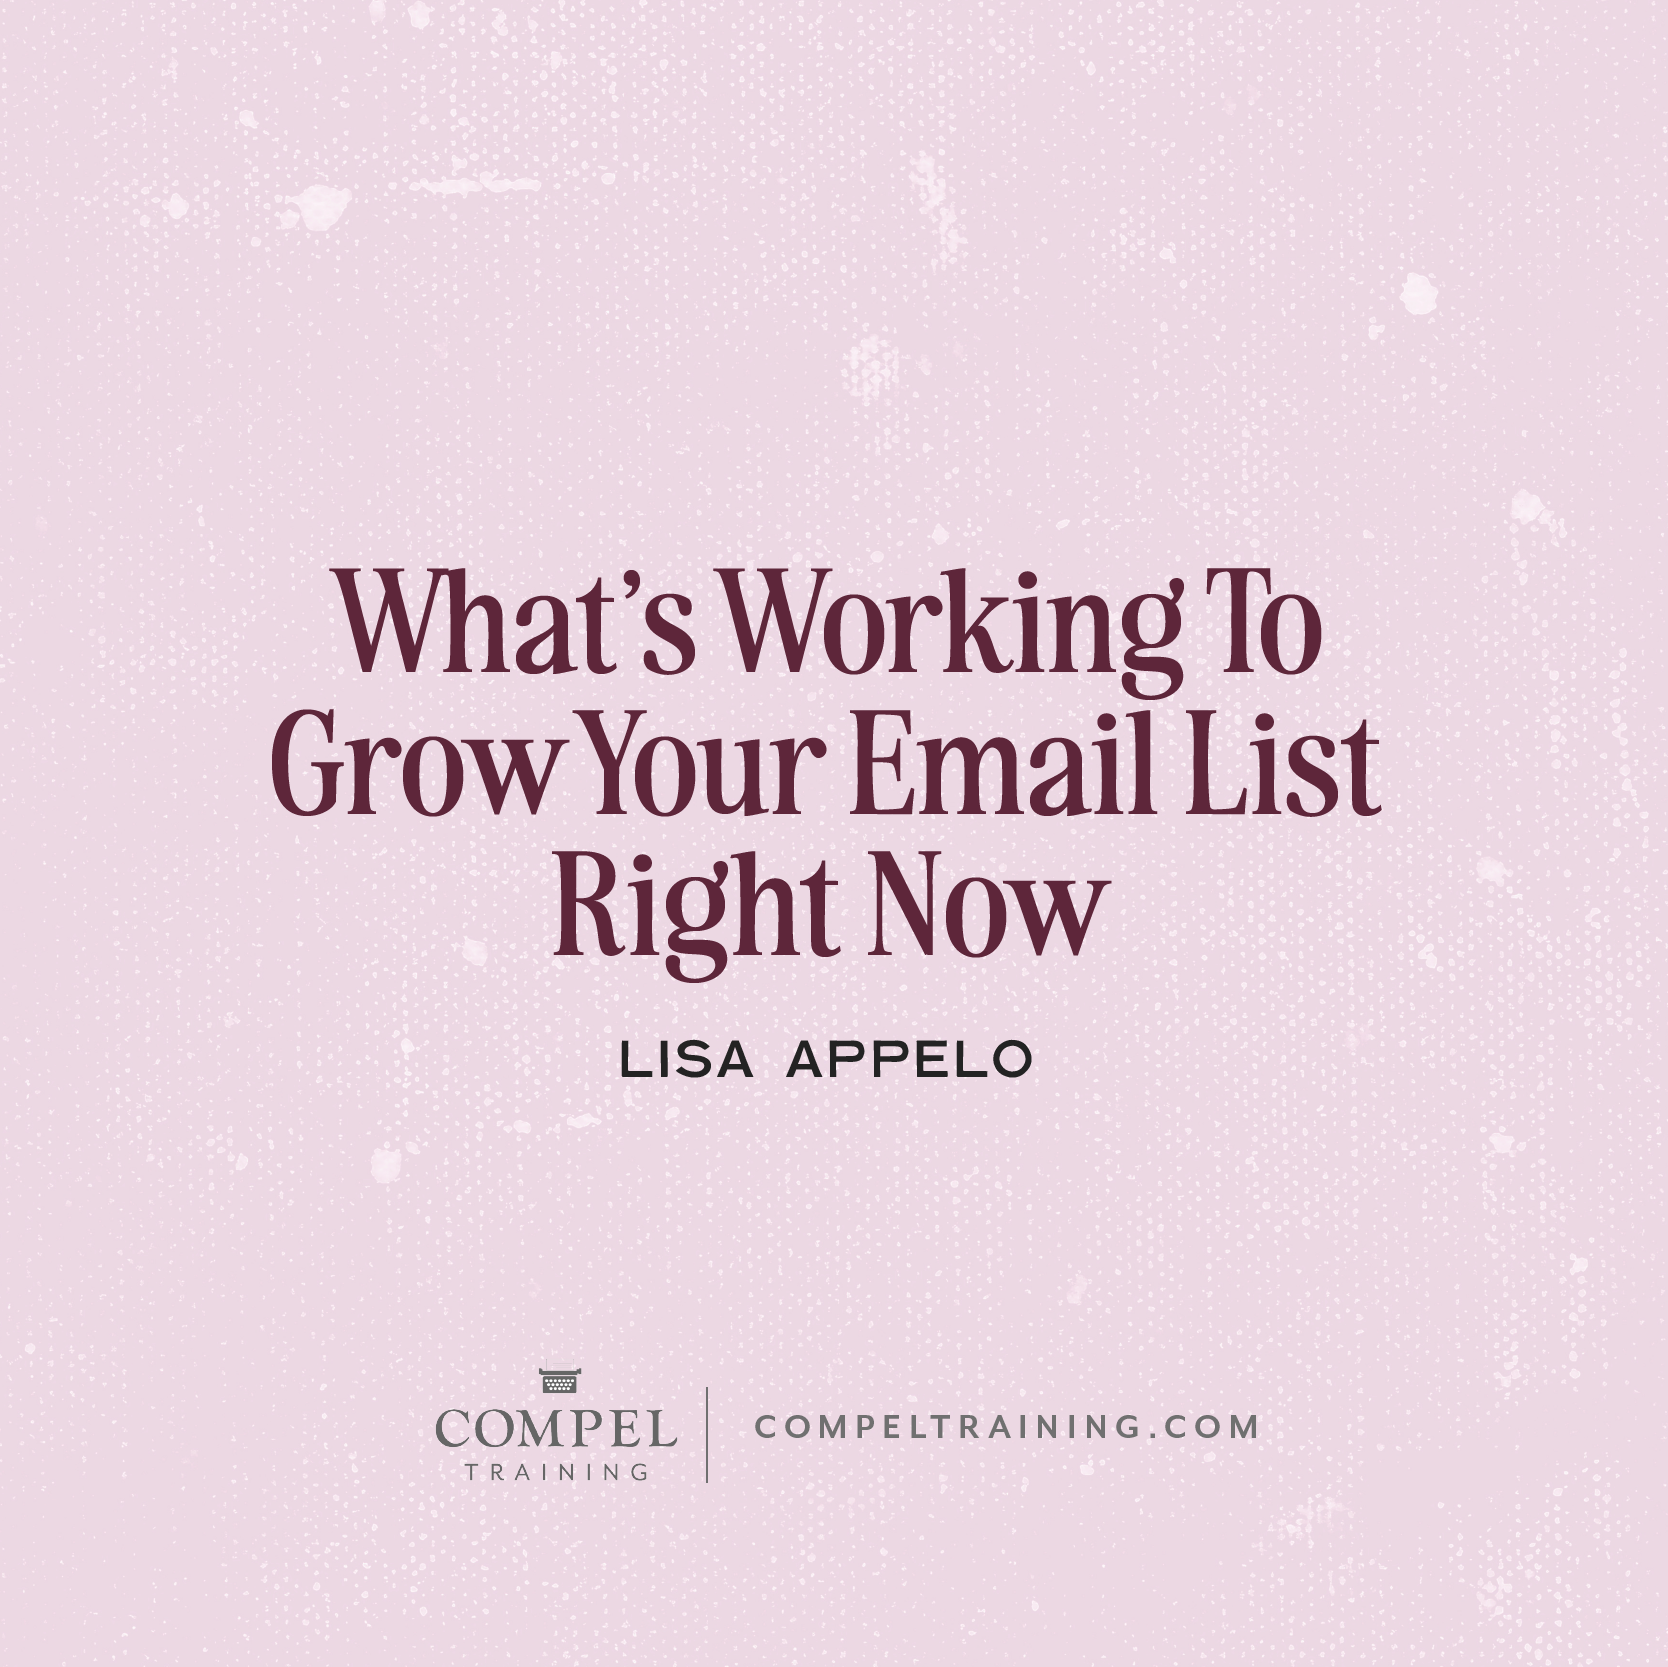 We hear this a lot: Grow your email list! But how do we do this successfully and without a massive headache? It sounds like too much work! Have no fear. We’ve got you covered, friend. Here are three ways to grow your email list that’s working right now!